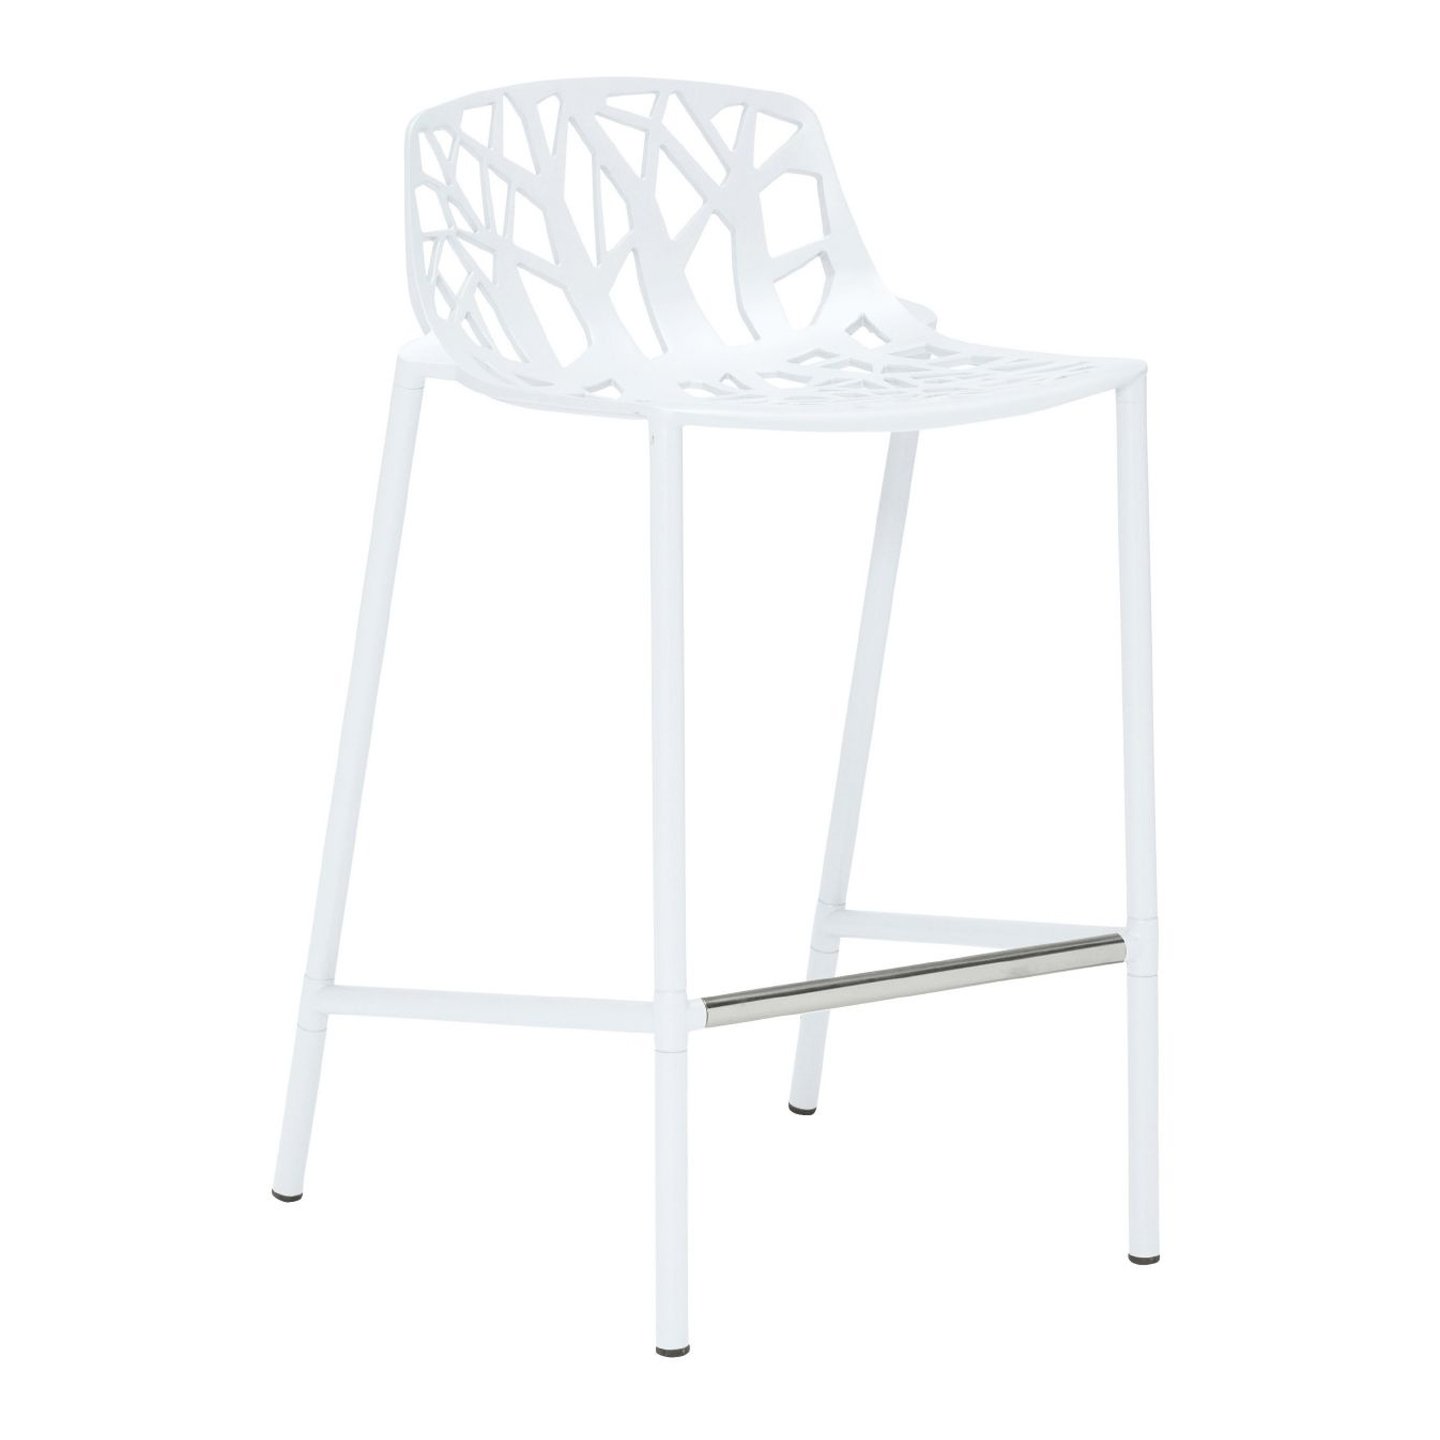 Haworth Forest stool in white in a side view